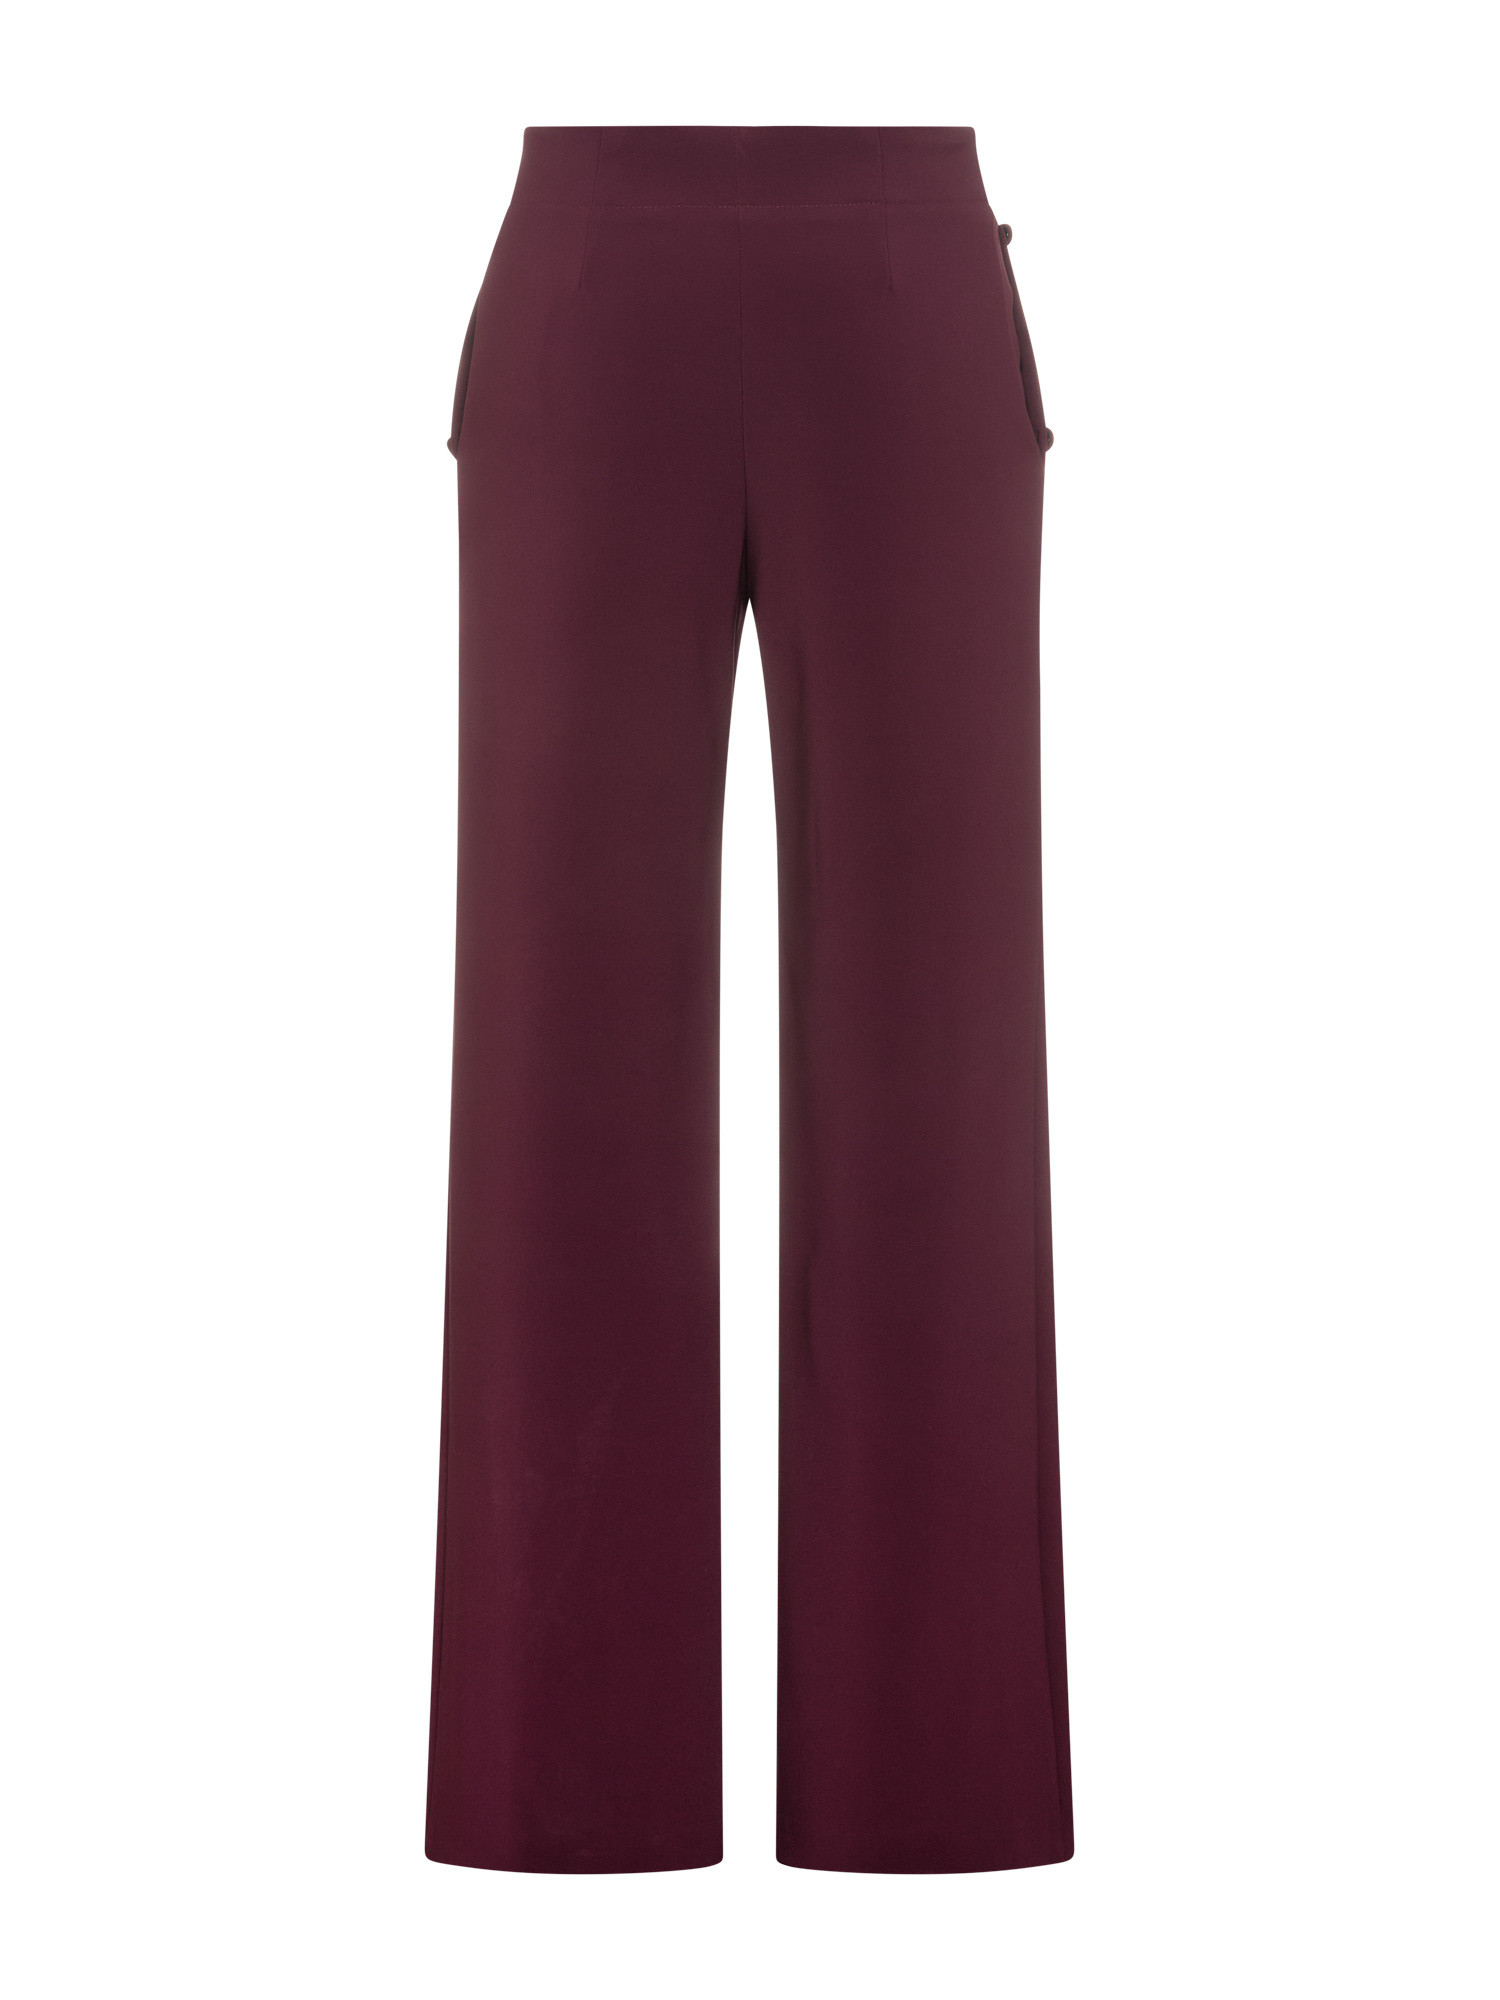 Koan - Wide leg trousers, Red Bordeaux, large image number 1